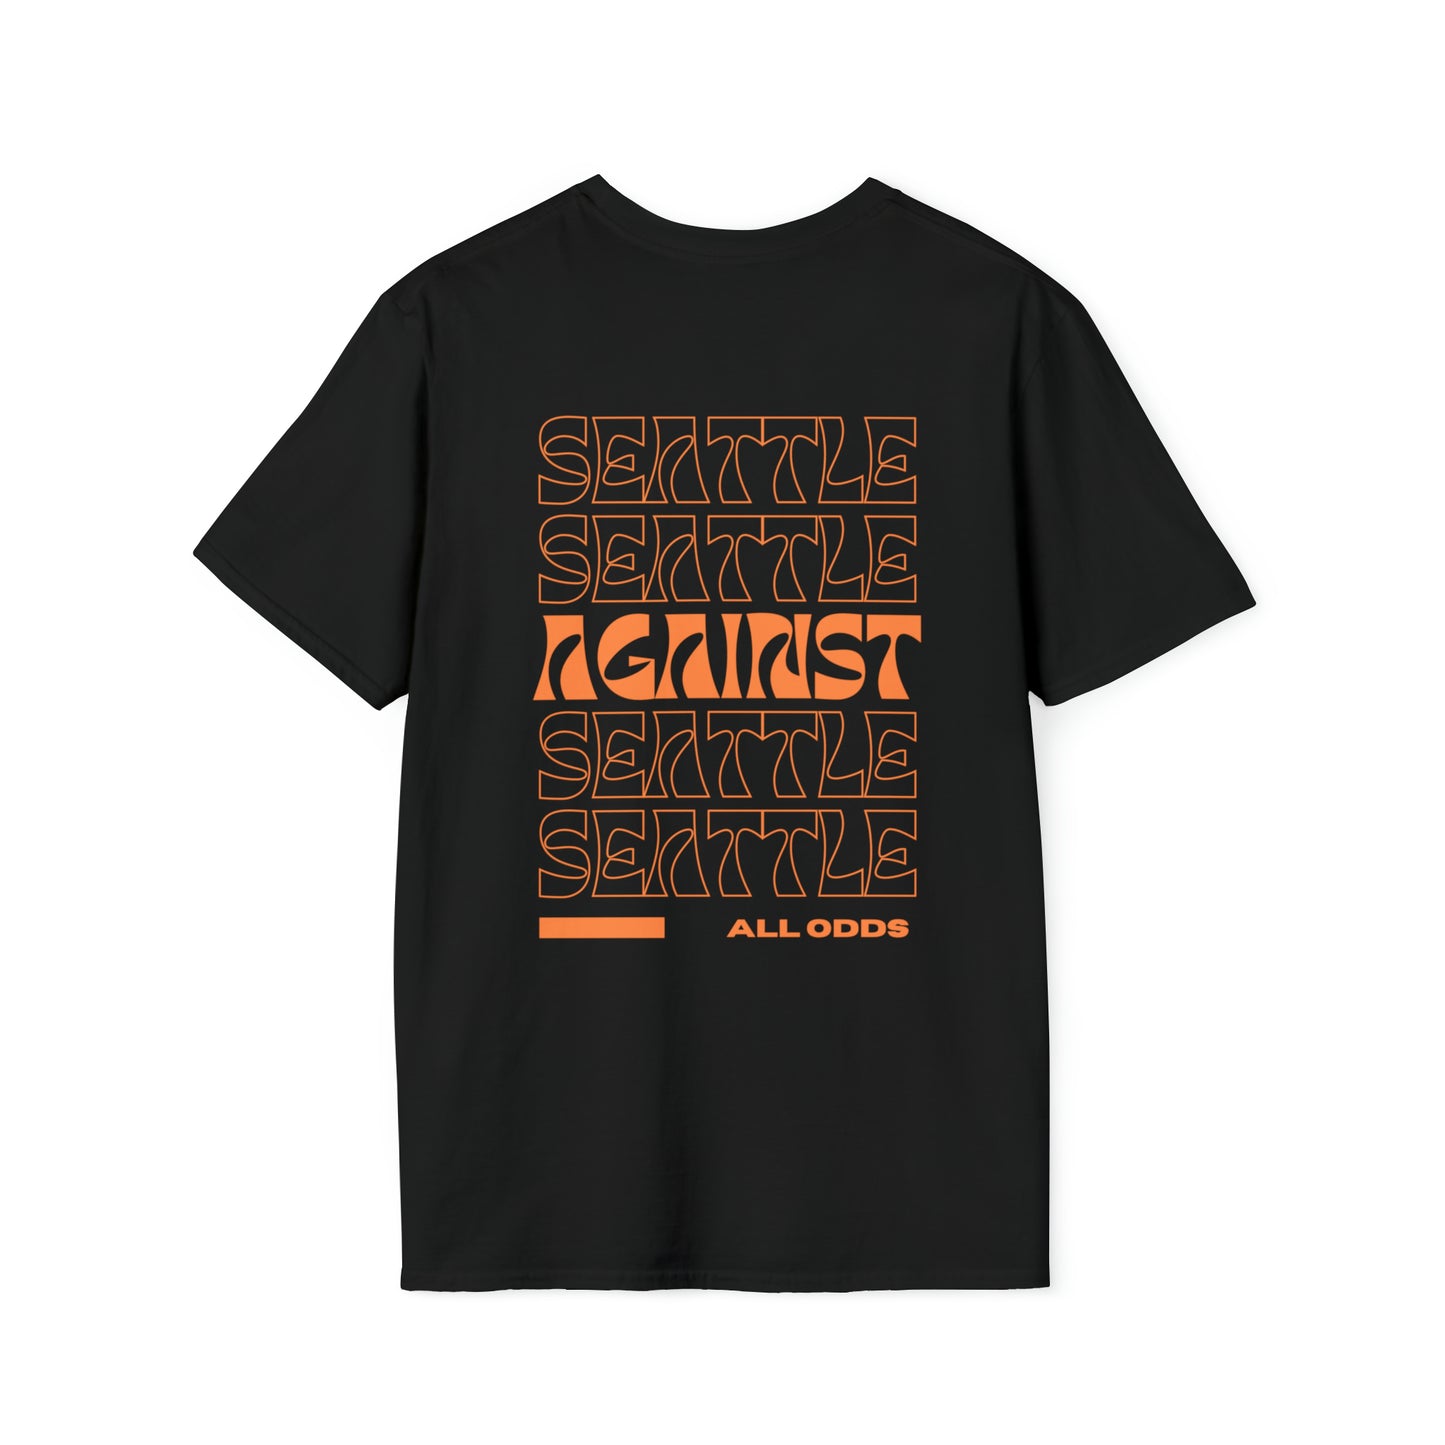 Seattle - Against All Odds T-Shirt